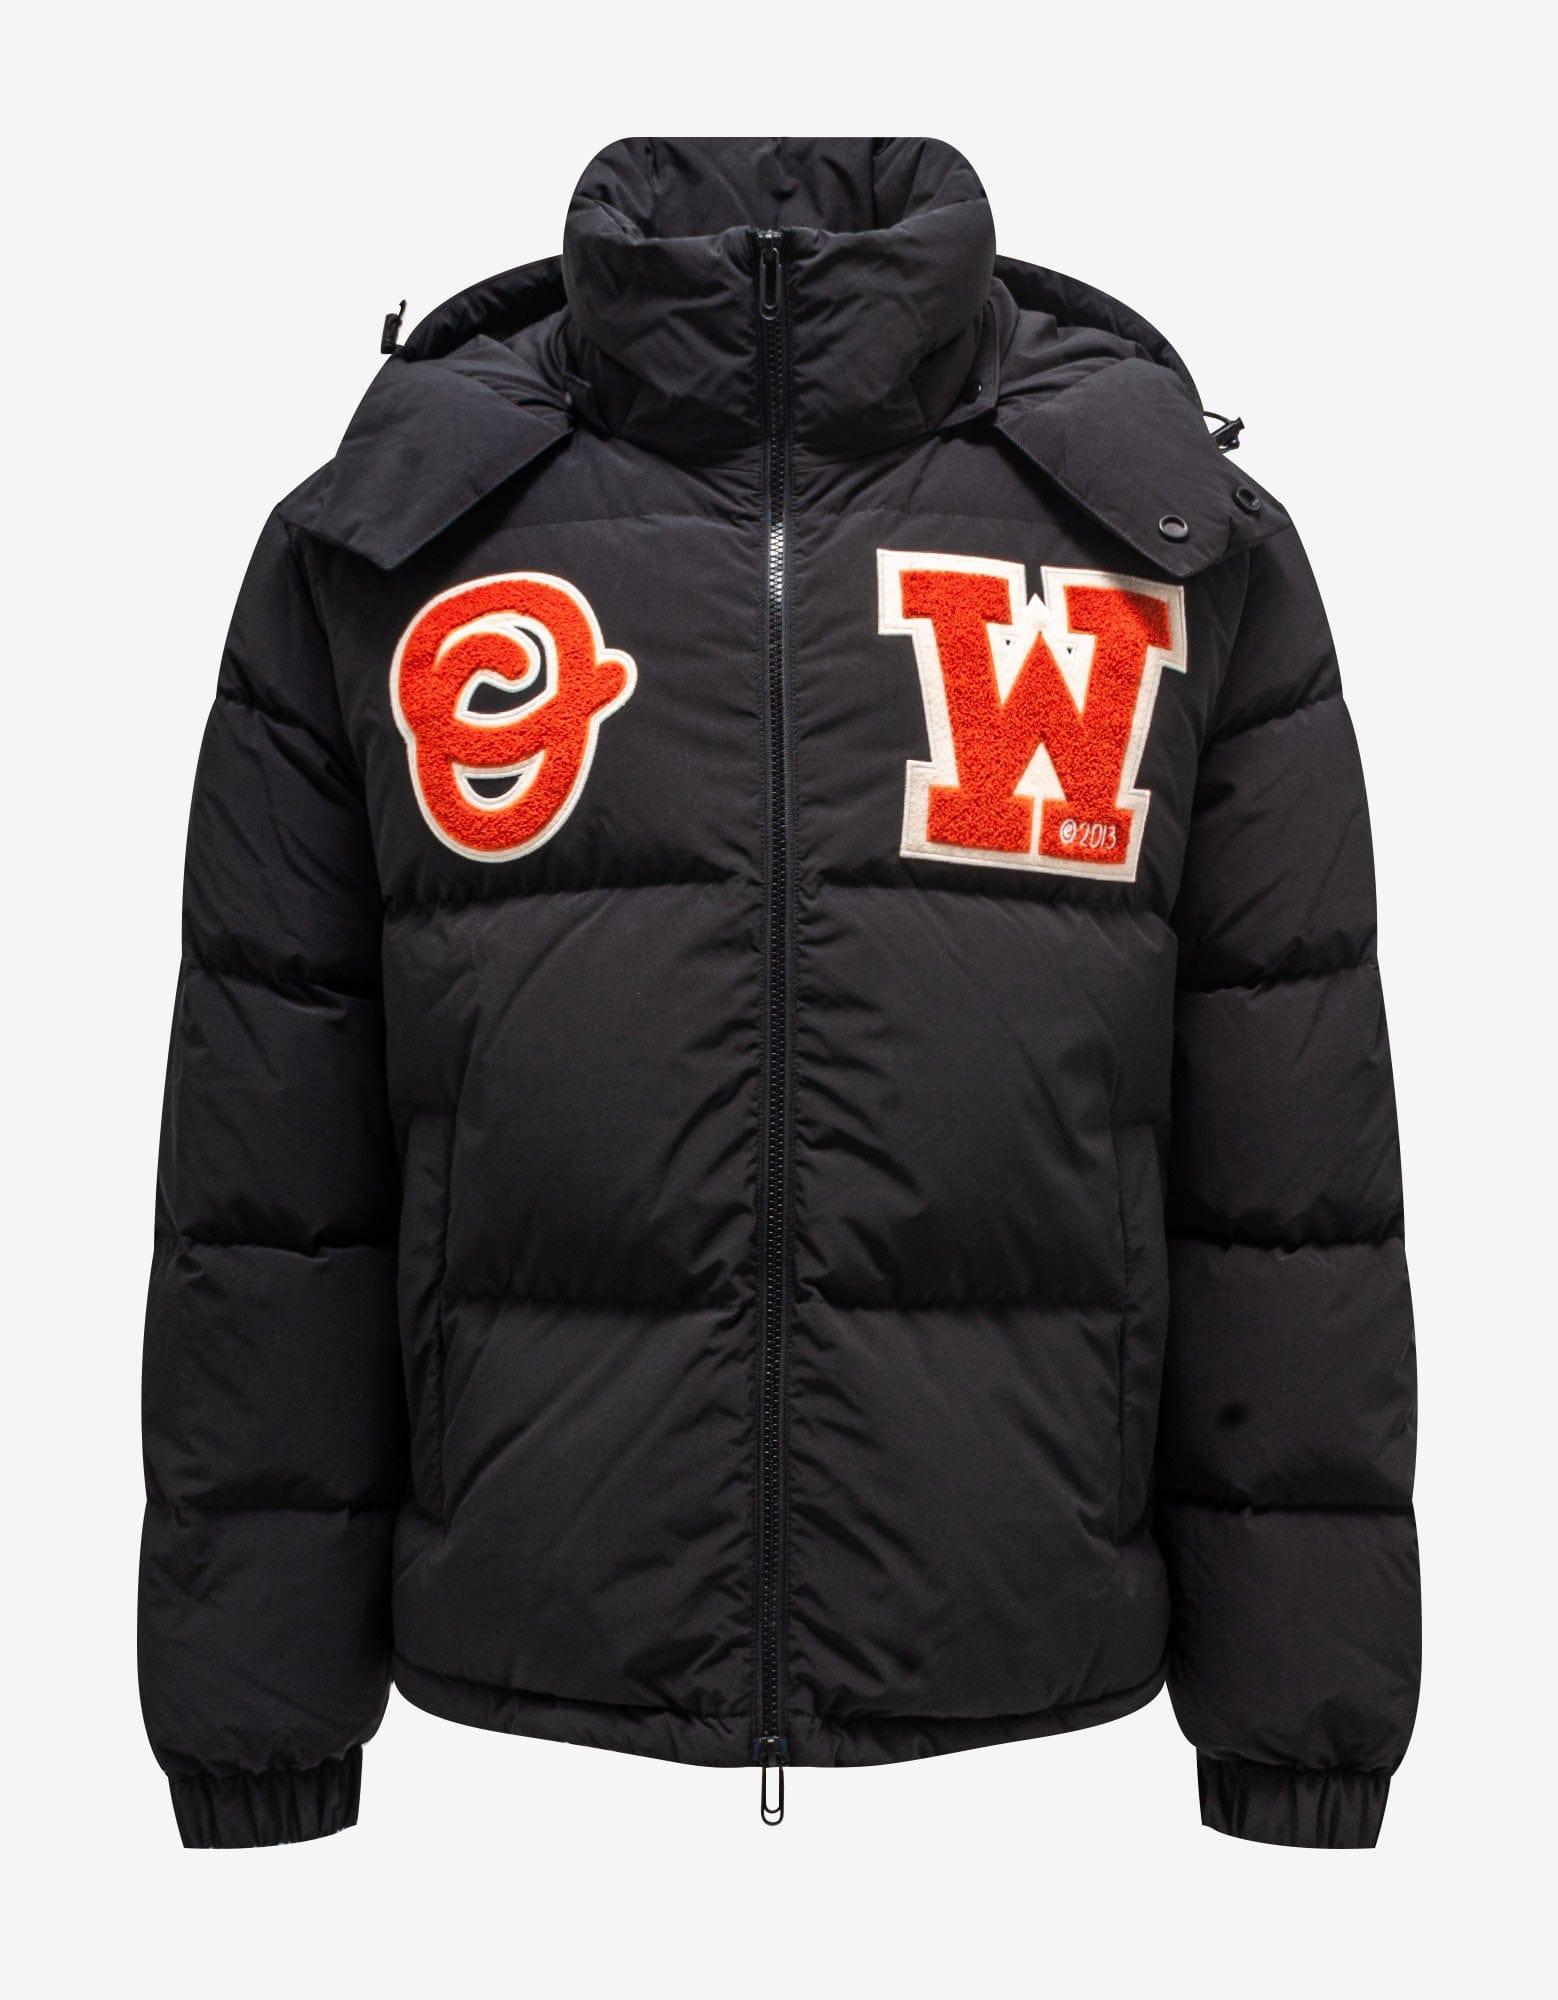 Save 45% Off-White c/o Virgil Abloh Ow Patch Puffer in Black Orange for Men Mens Jackets Off-White c/o Virgil Abloh Jackets Black 